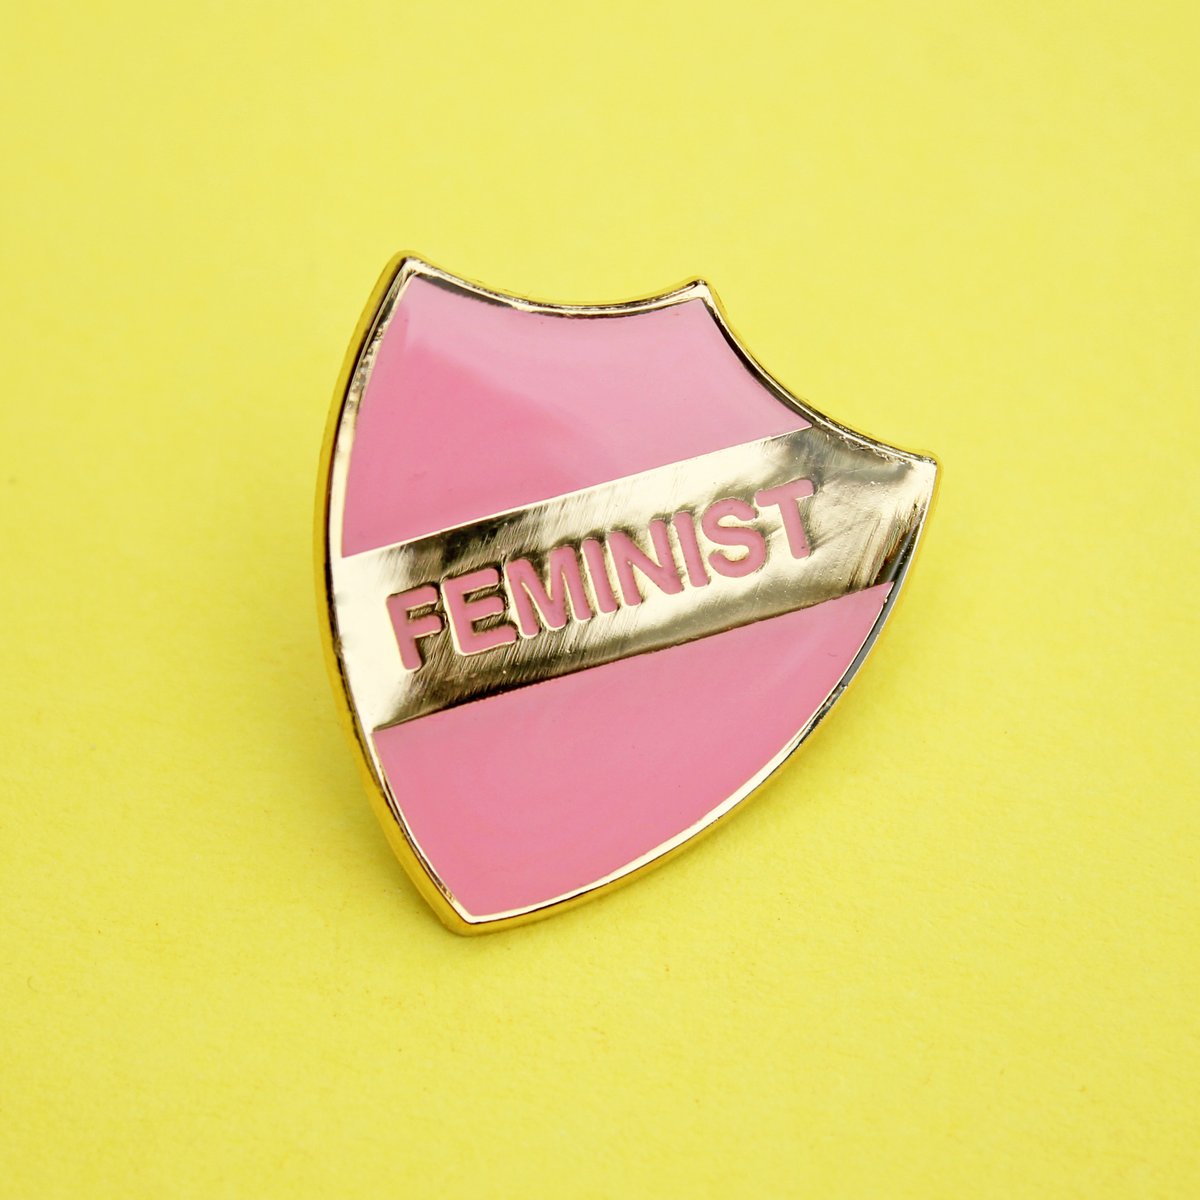 Feminist Enamel Pin Shield Pink With Gold Plating Merit Style